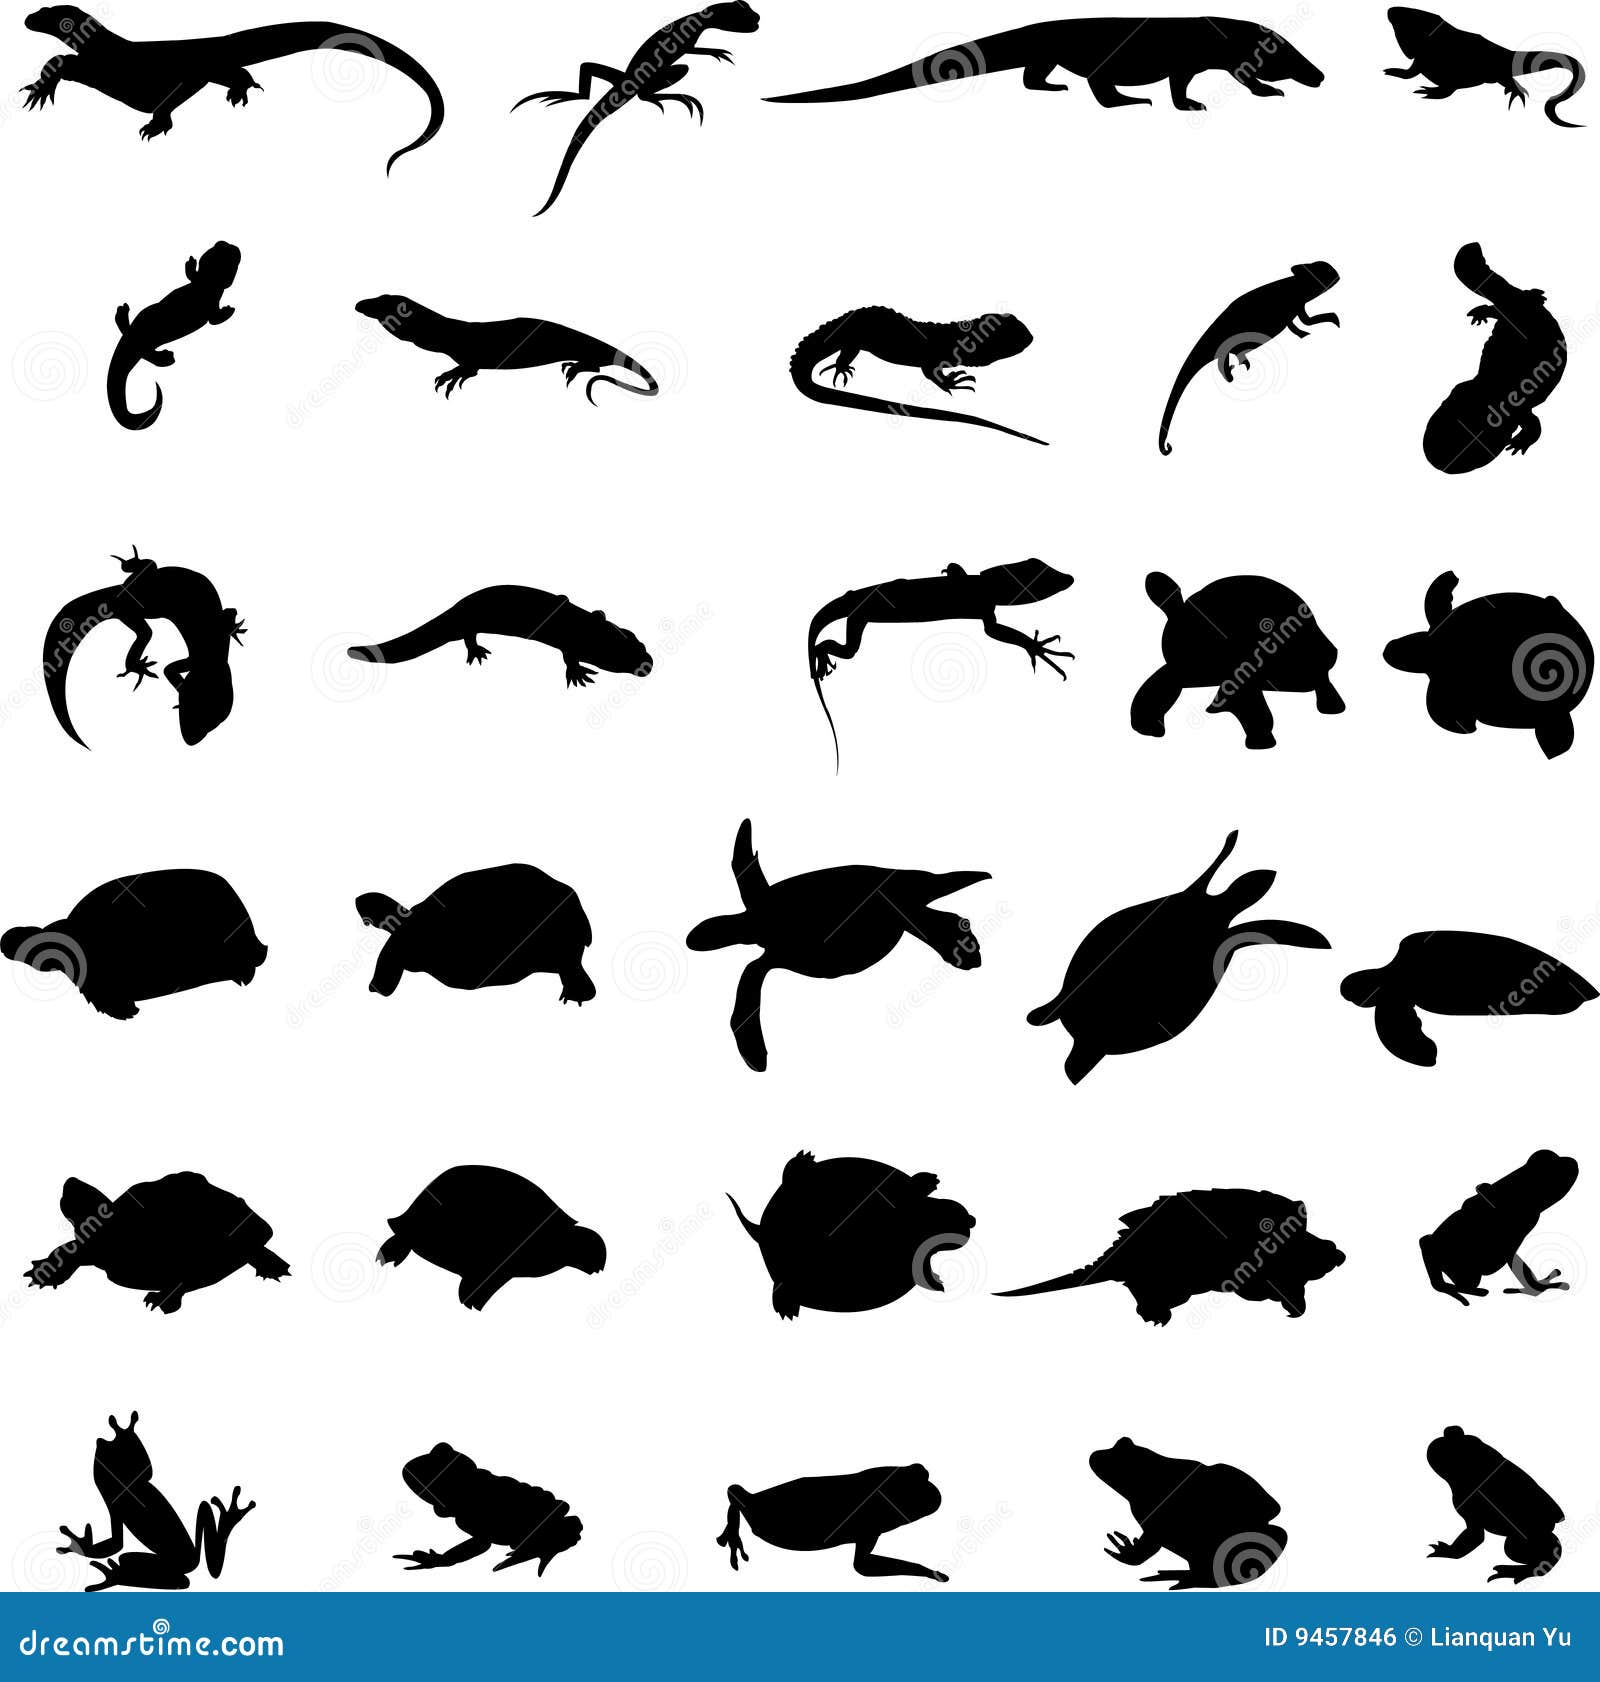 amphibians and reptiles